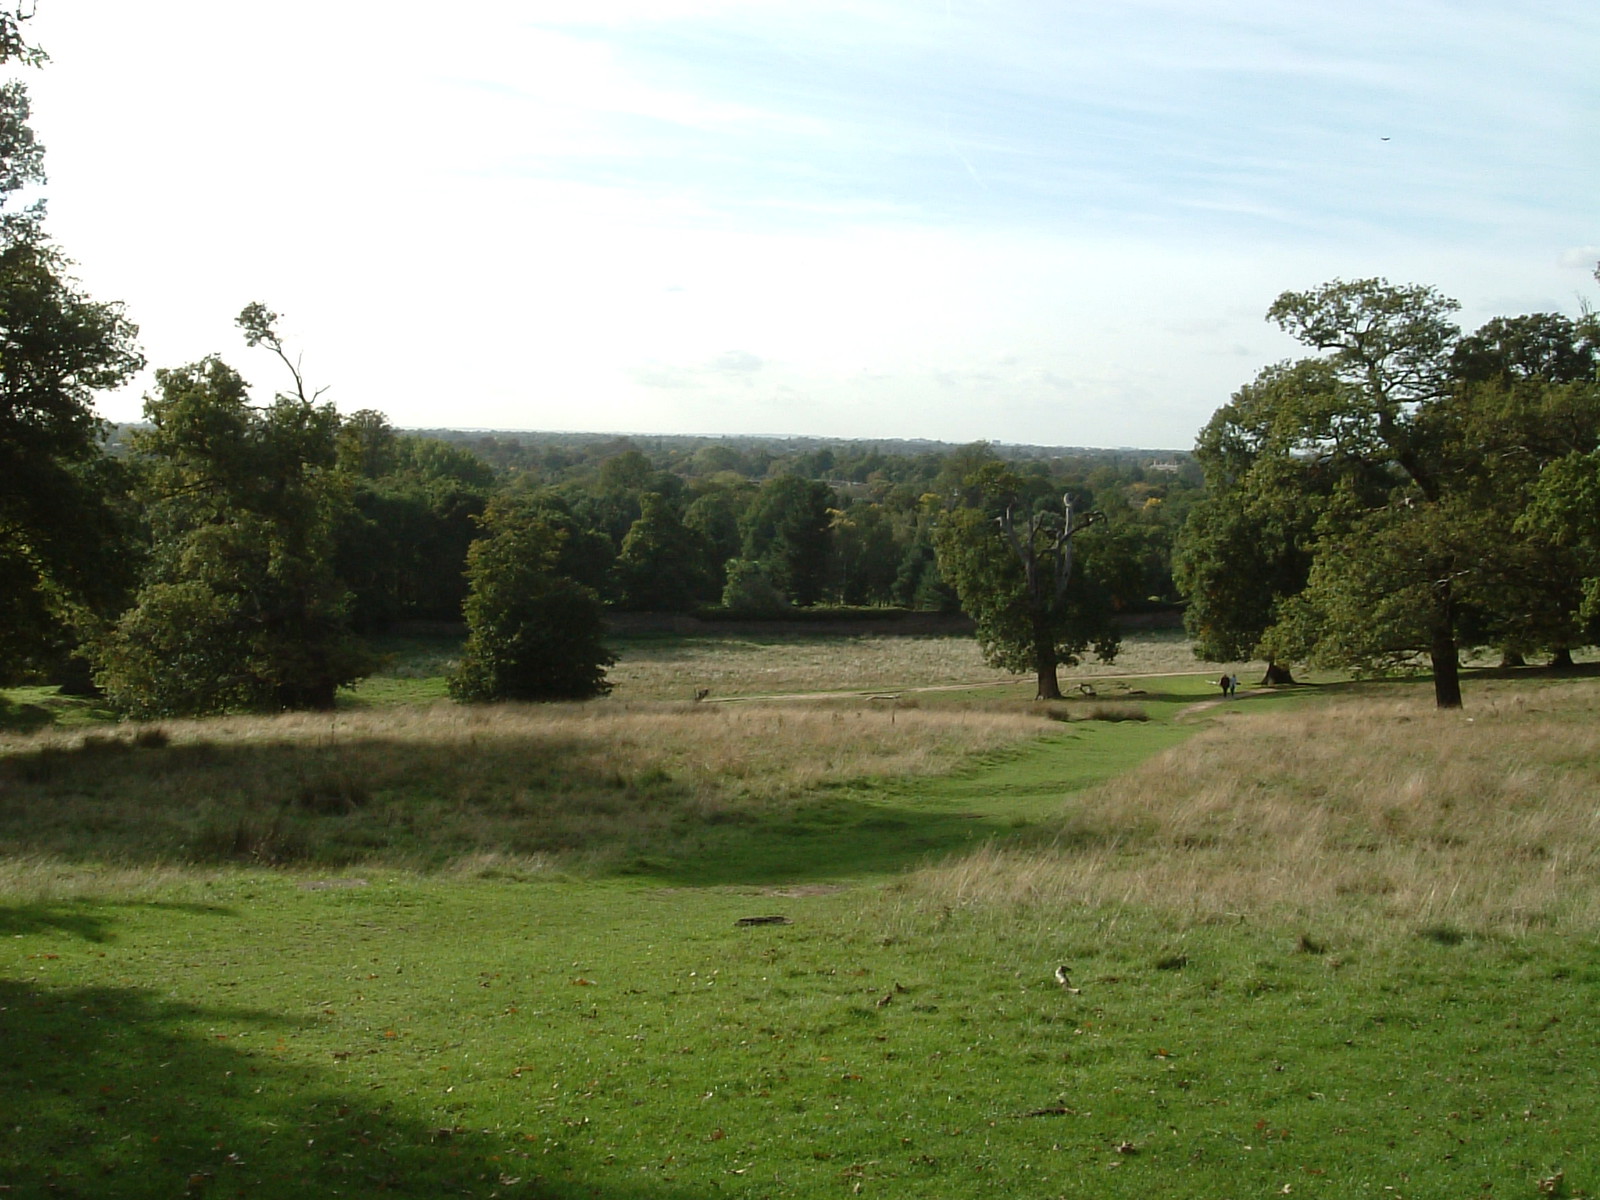 The view west over Petersham Park